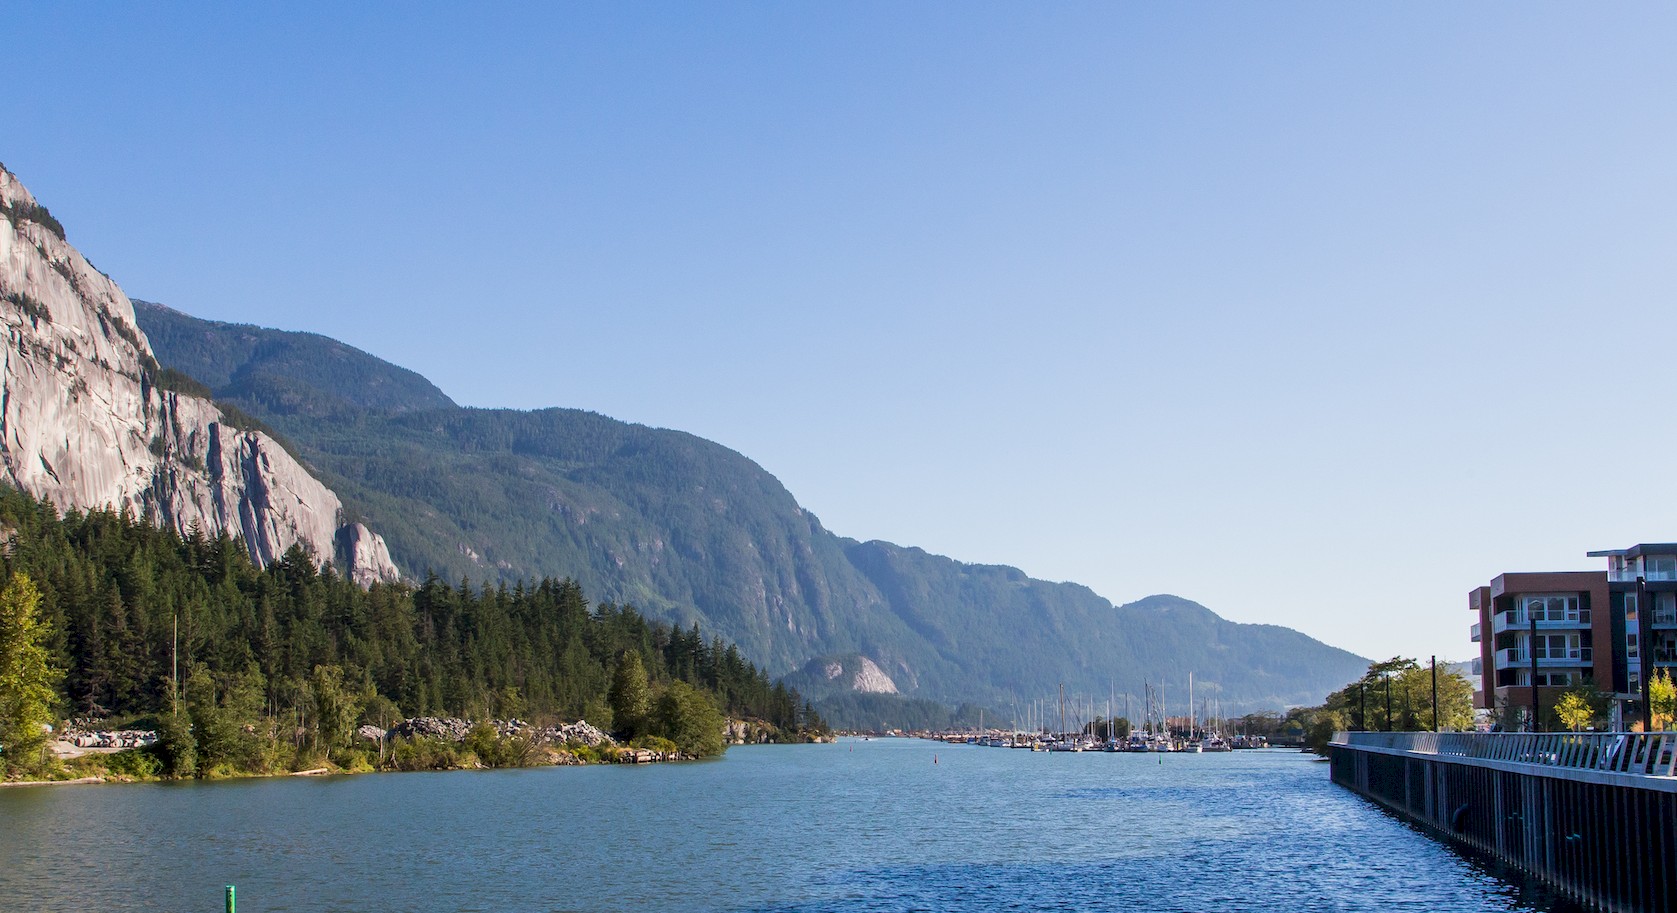 View of Squamish Chief & Waterfront